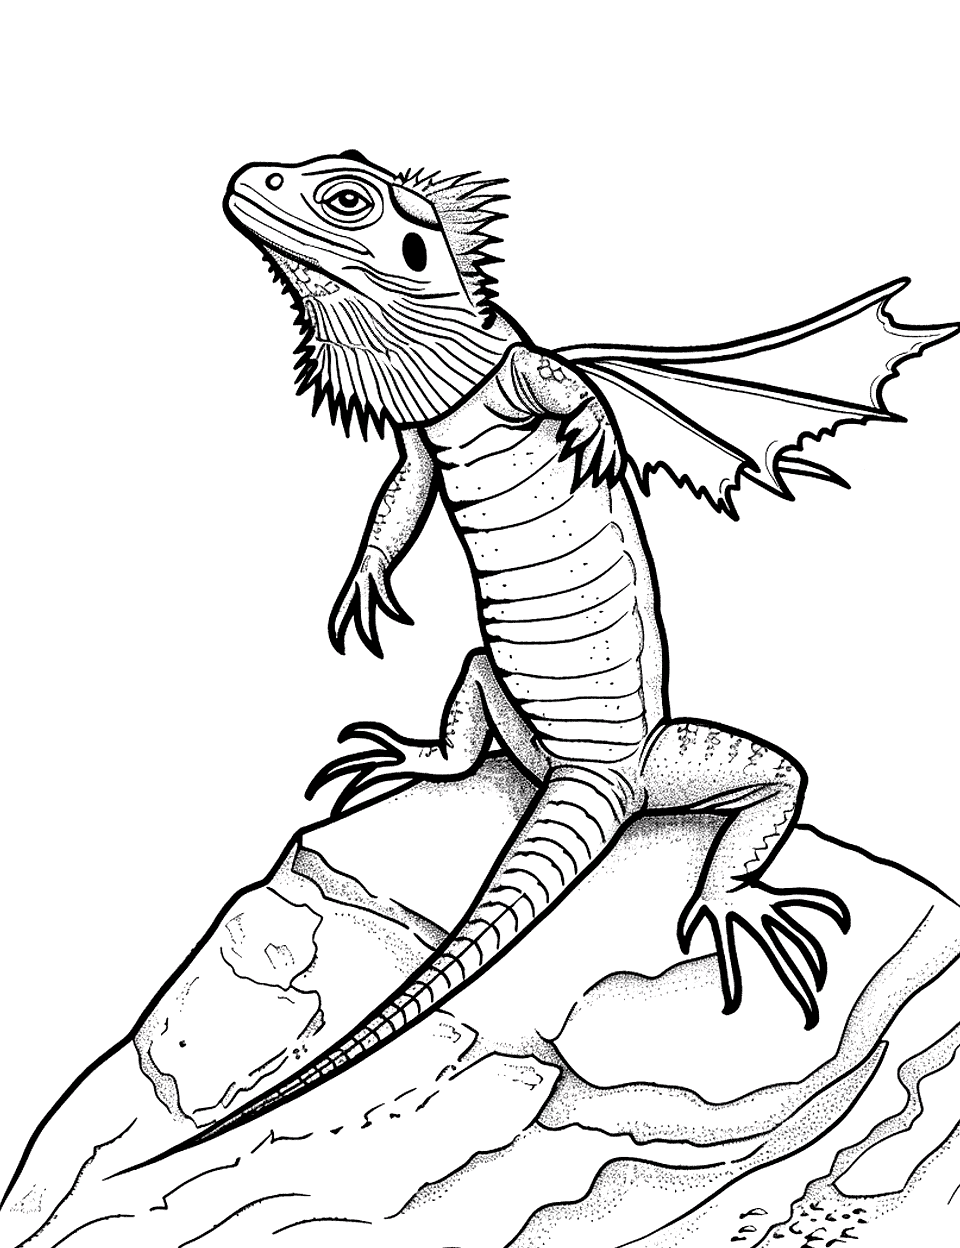 Frilled Lizard Display Coloring Page - A frilled lizard with its frill expanded, standing alert on a small mound.